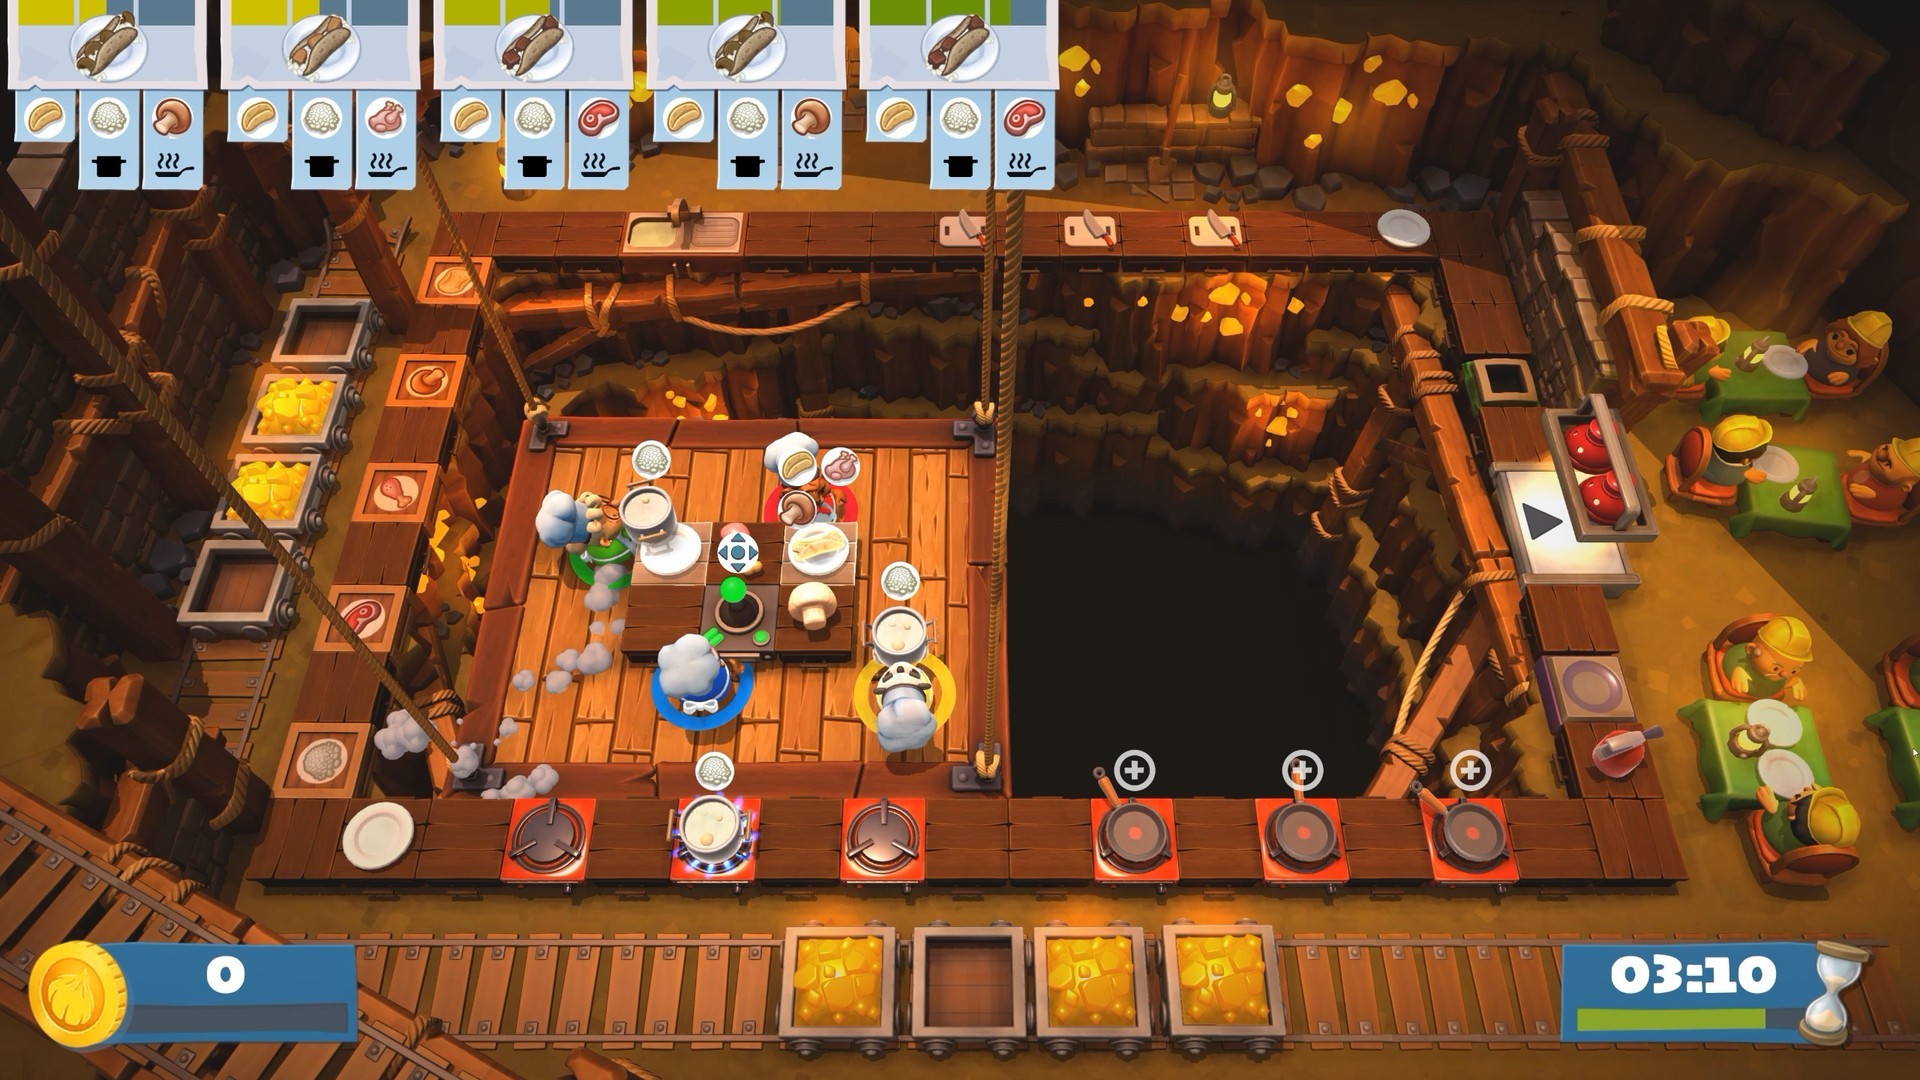 overcooked 2 switch price